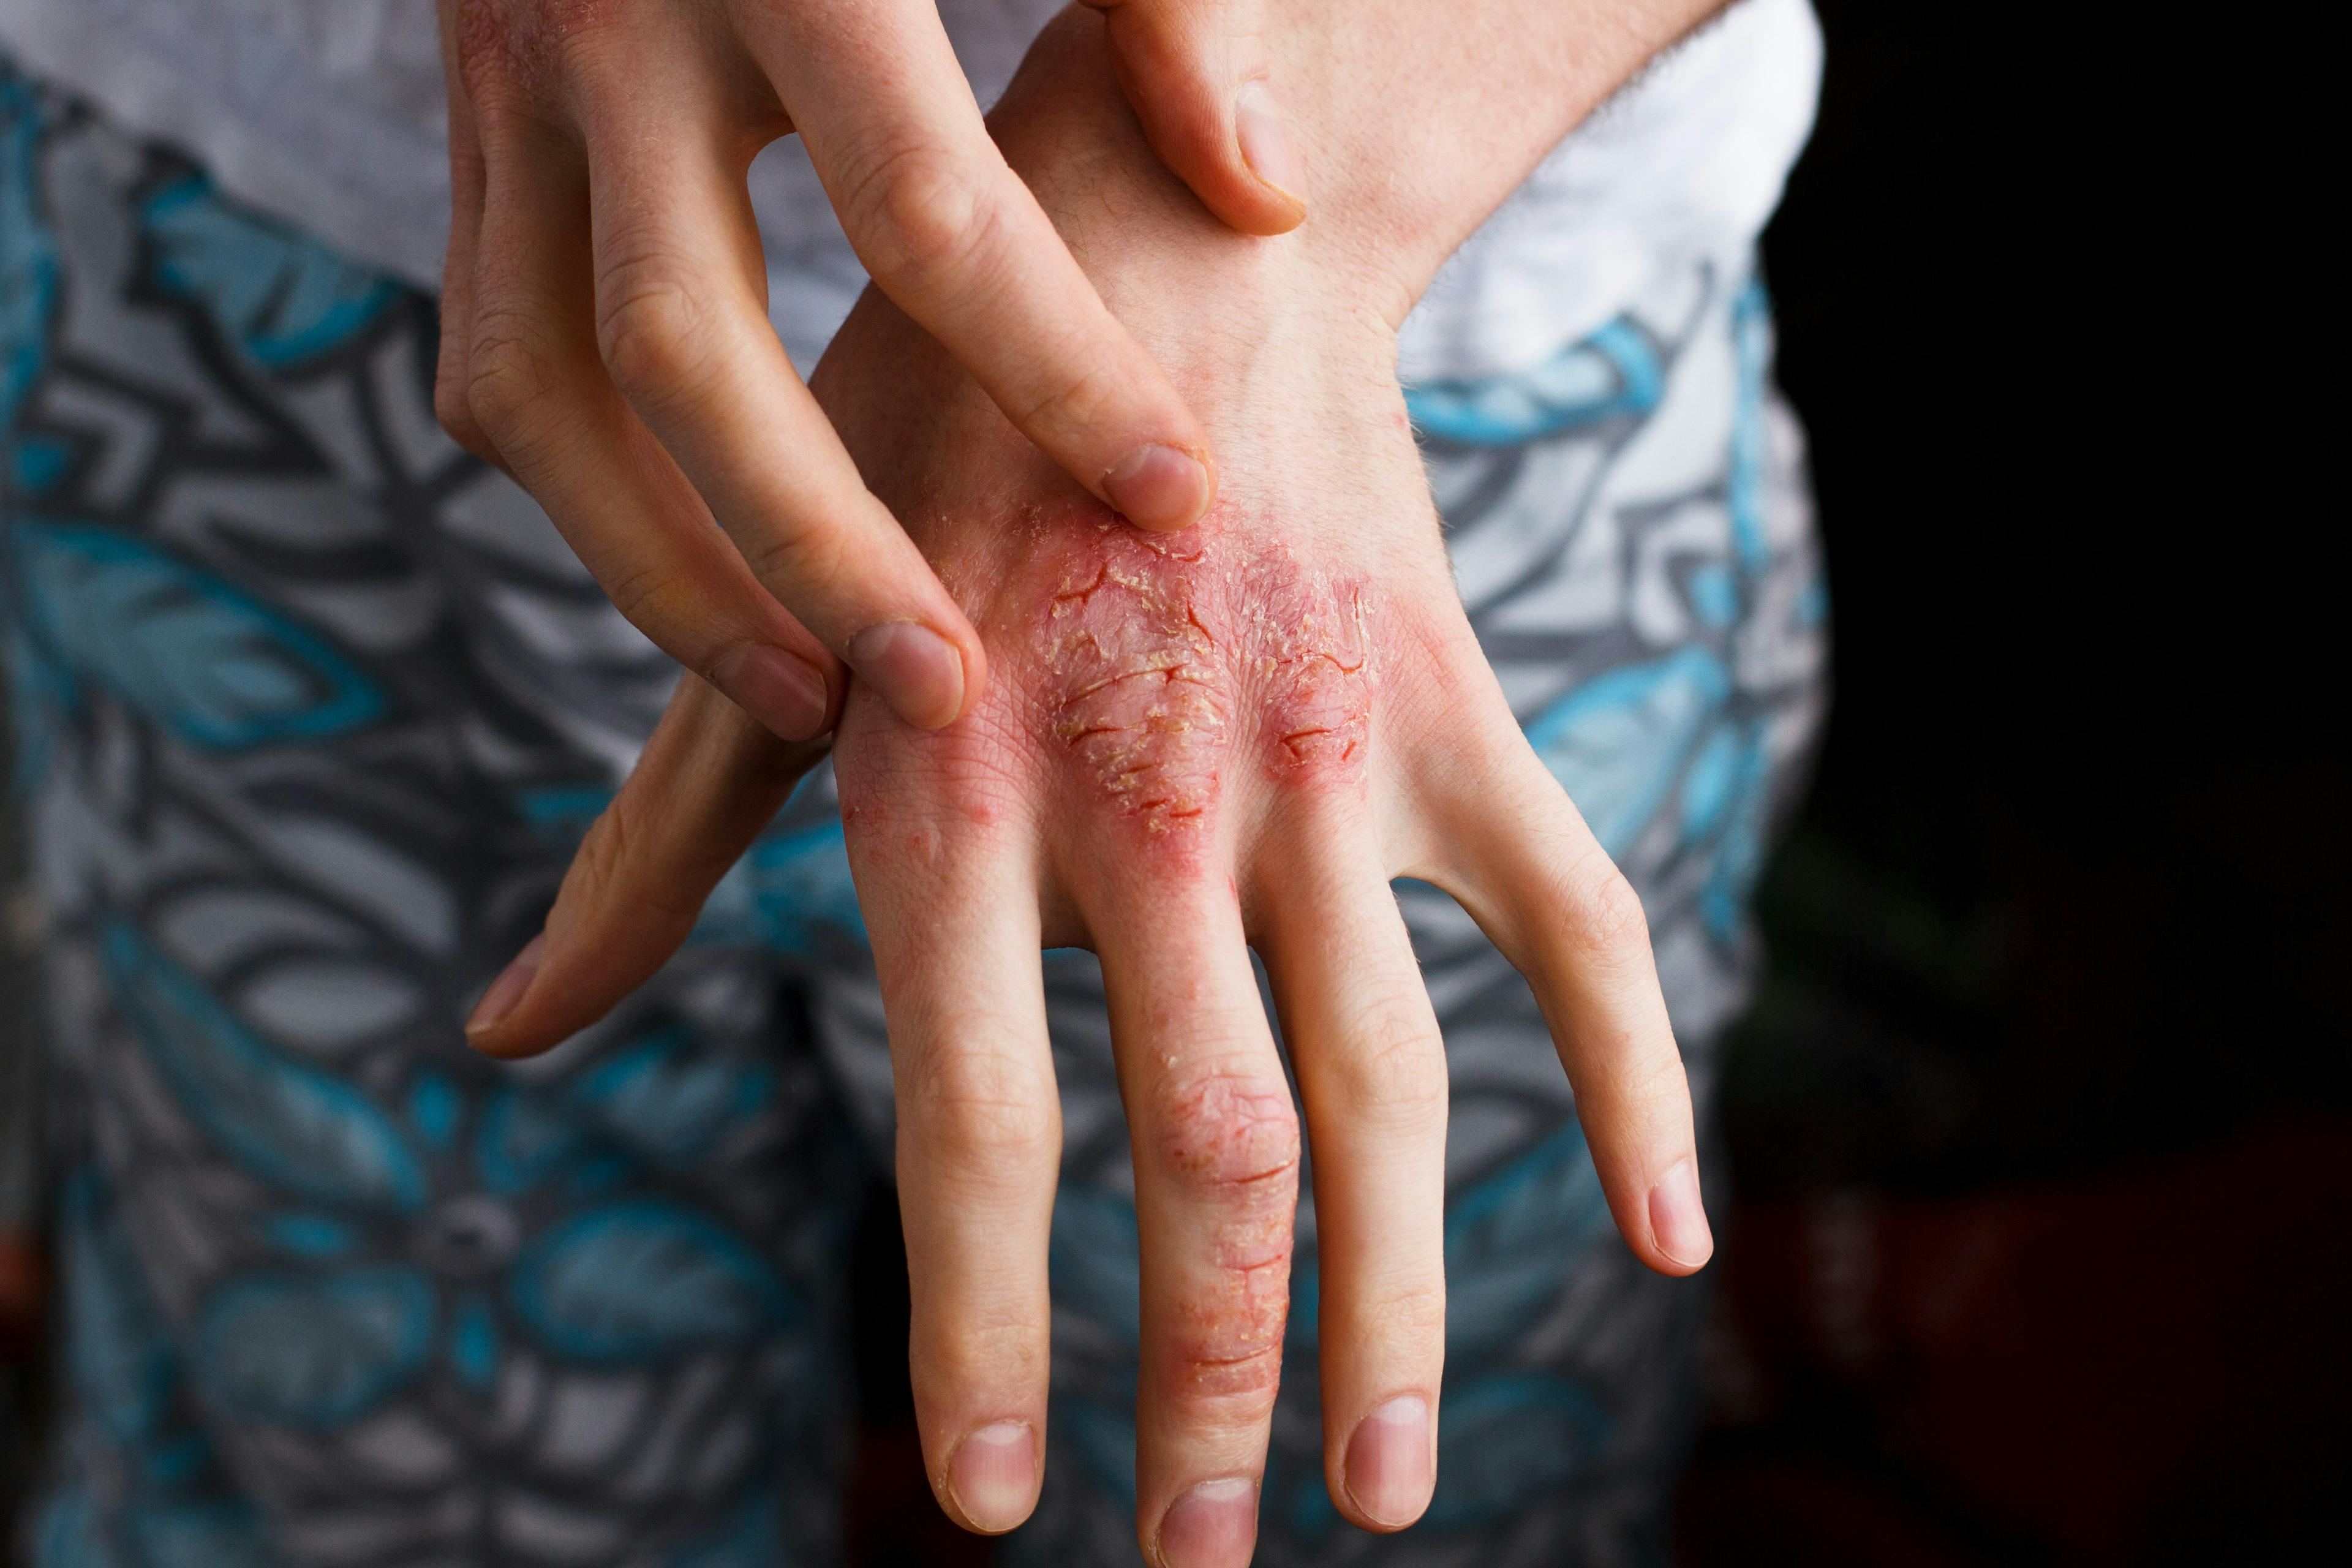 Skin infection on hand